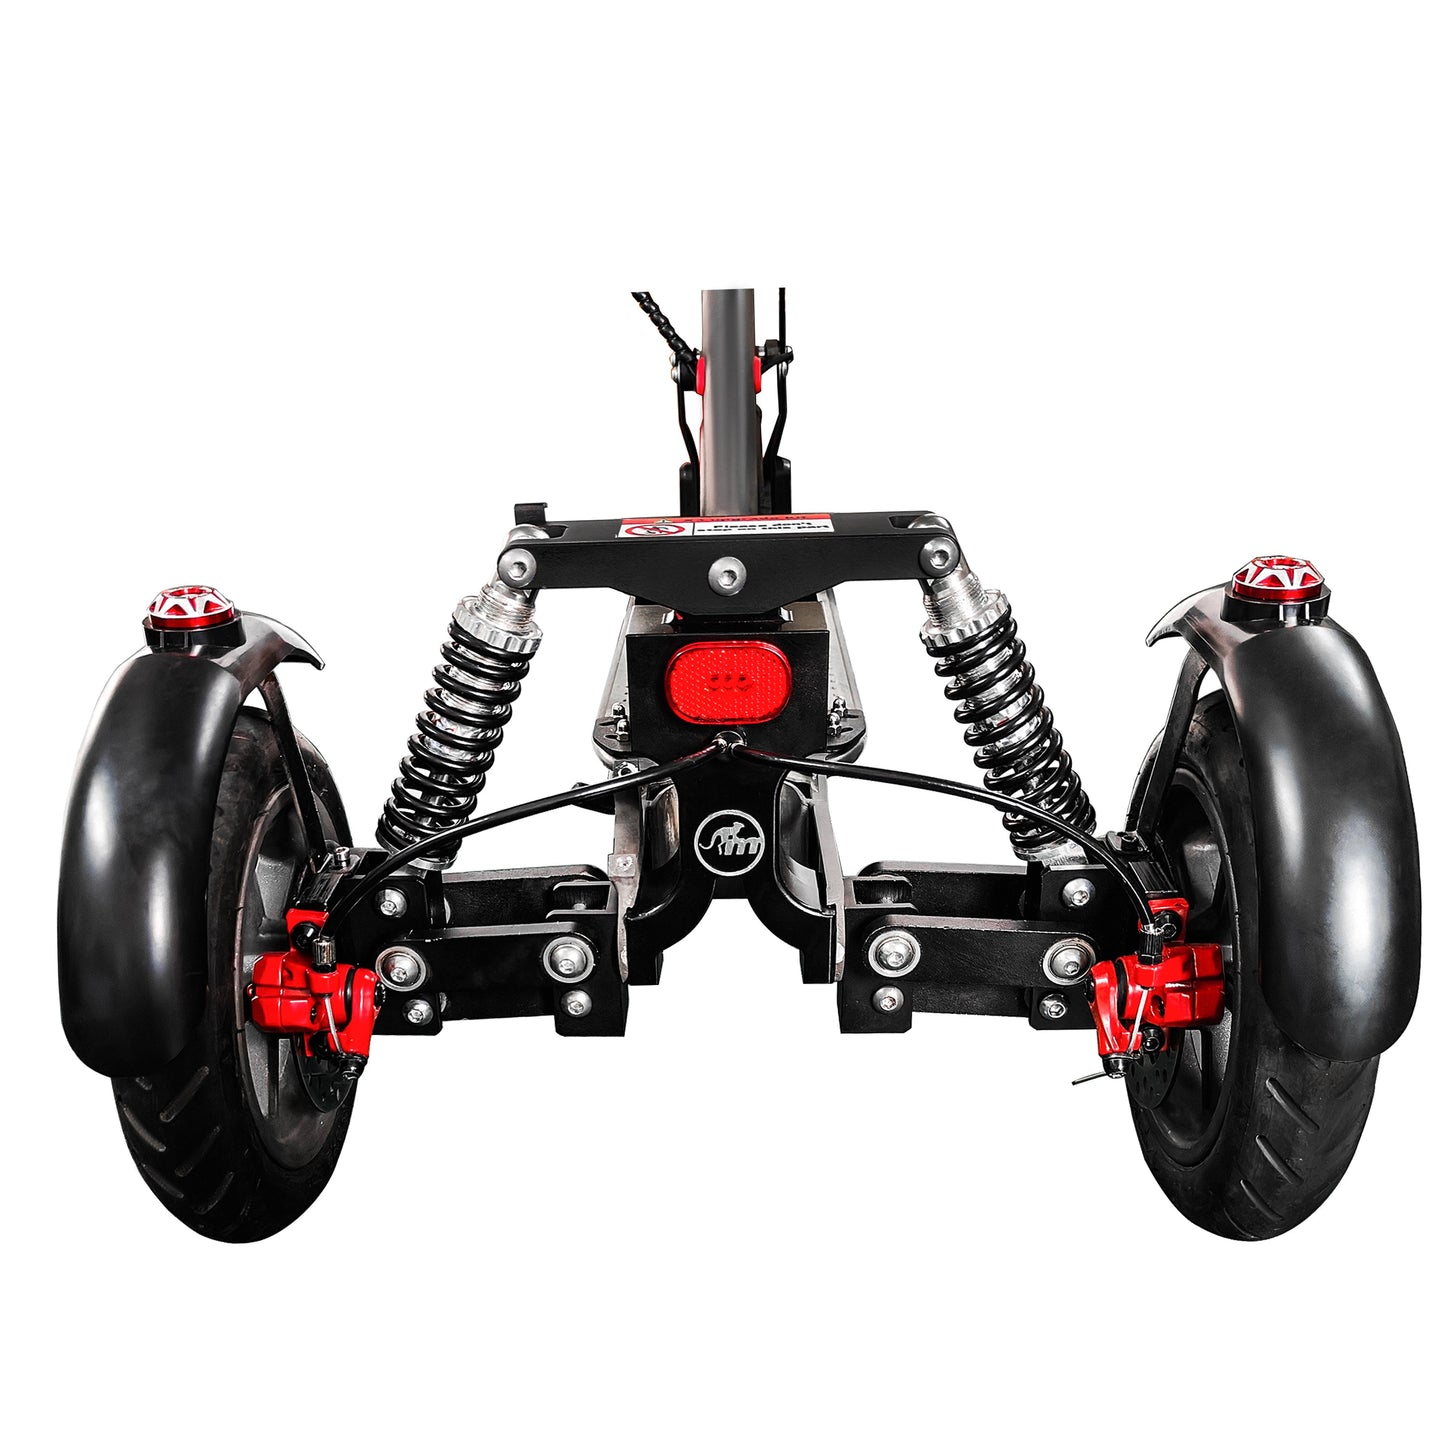 Monorim X3 upgrade kit to be Three wheels special for xiaomi m365 scooter